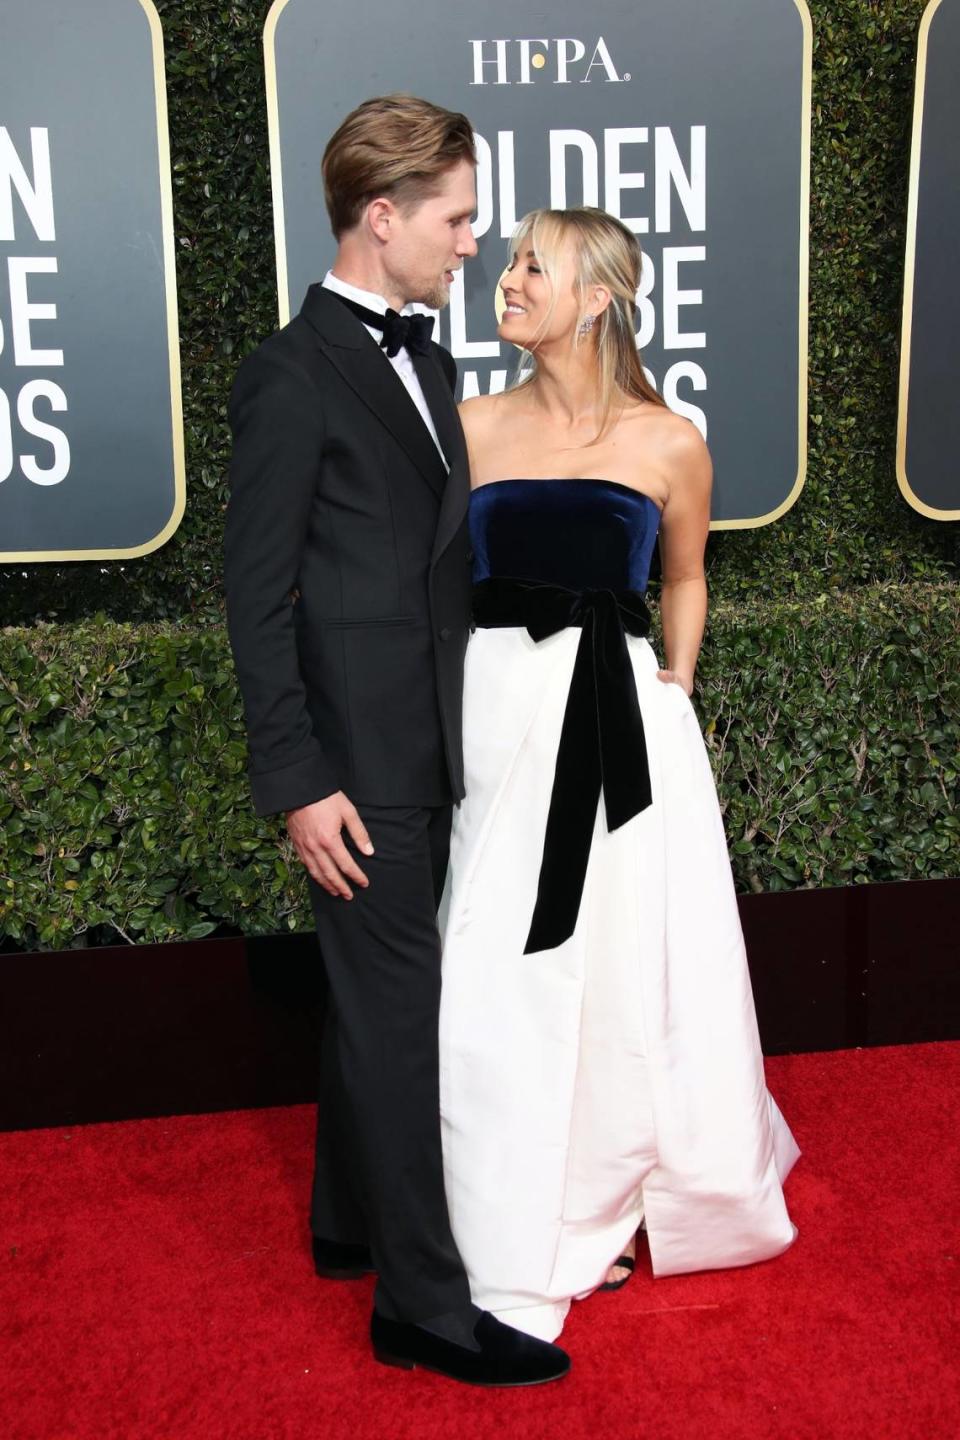 Karl Cook and actress Kaley Cuoco, shown at the 2019 Golden Globe Awards, were married for just shy of four years.